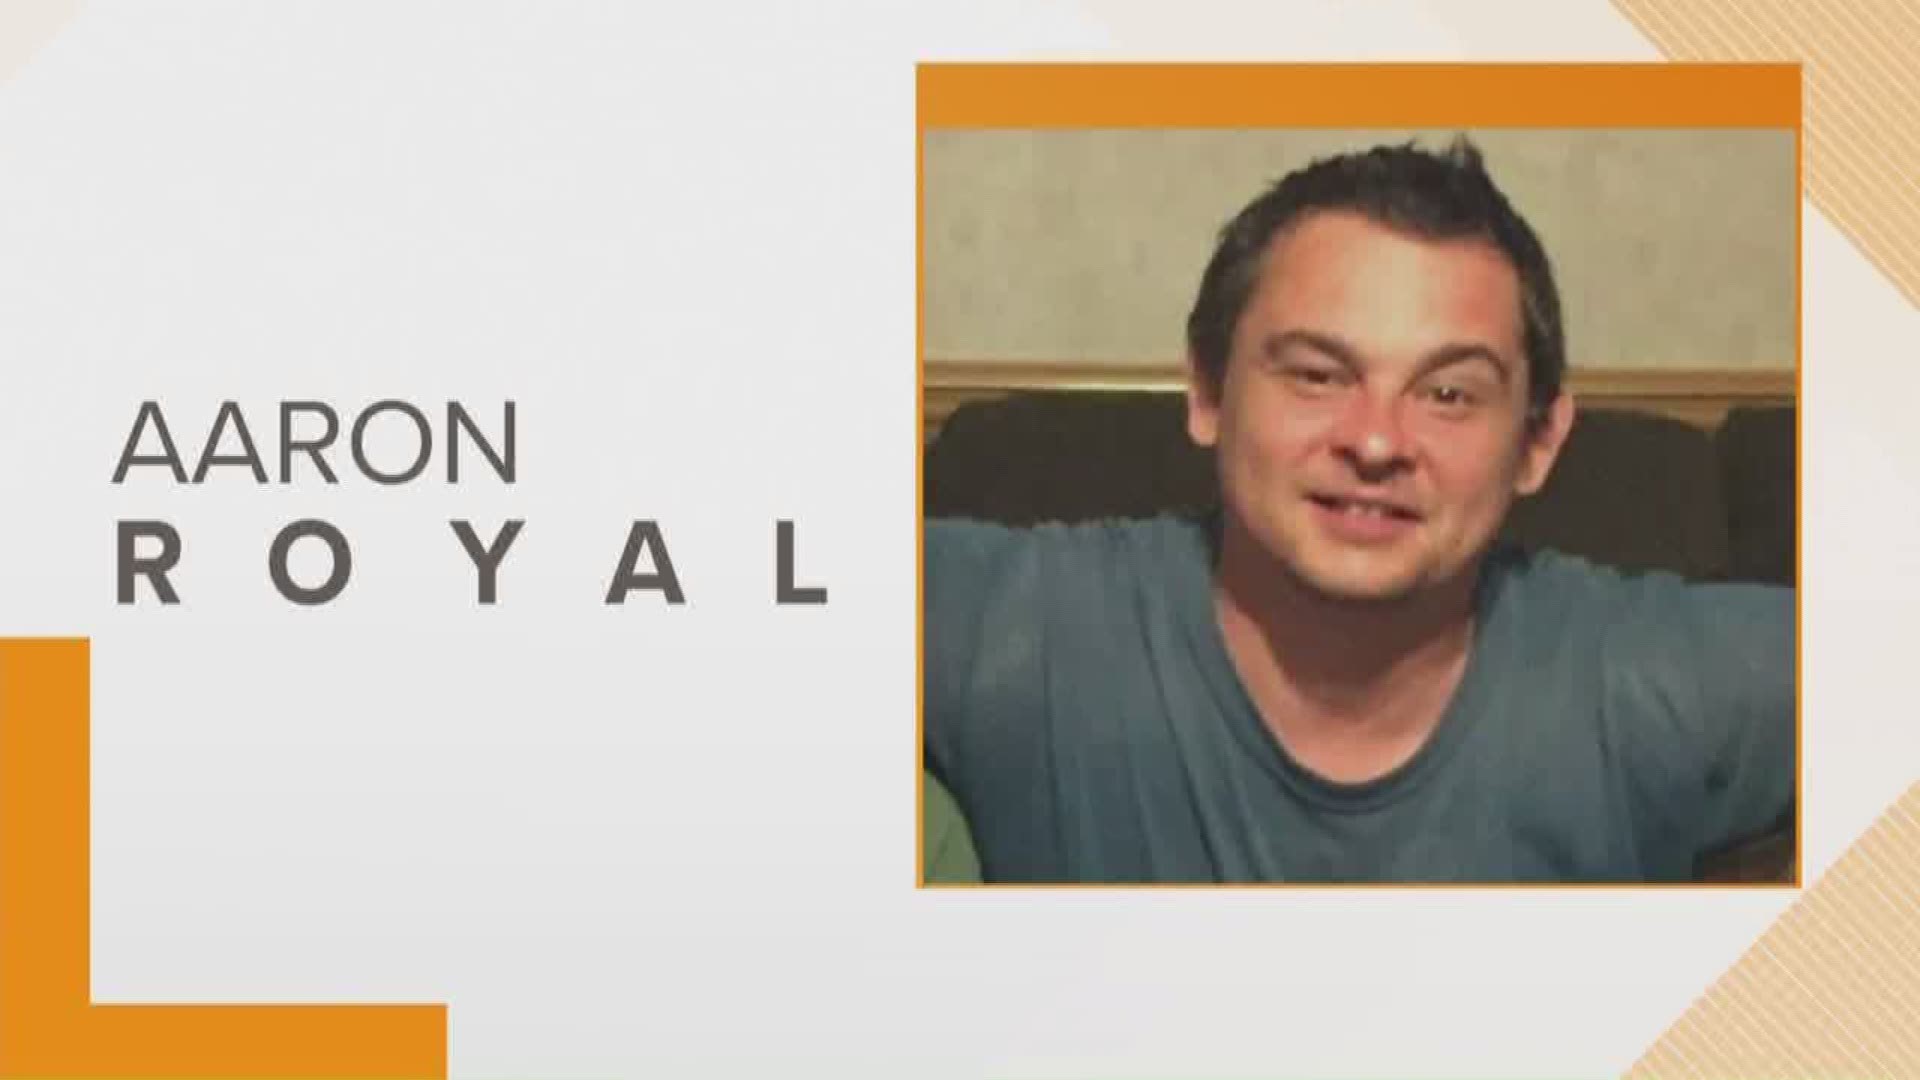 Aaron Royal had been missing for about a week.